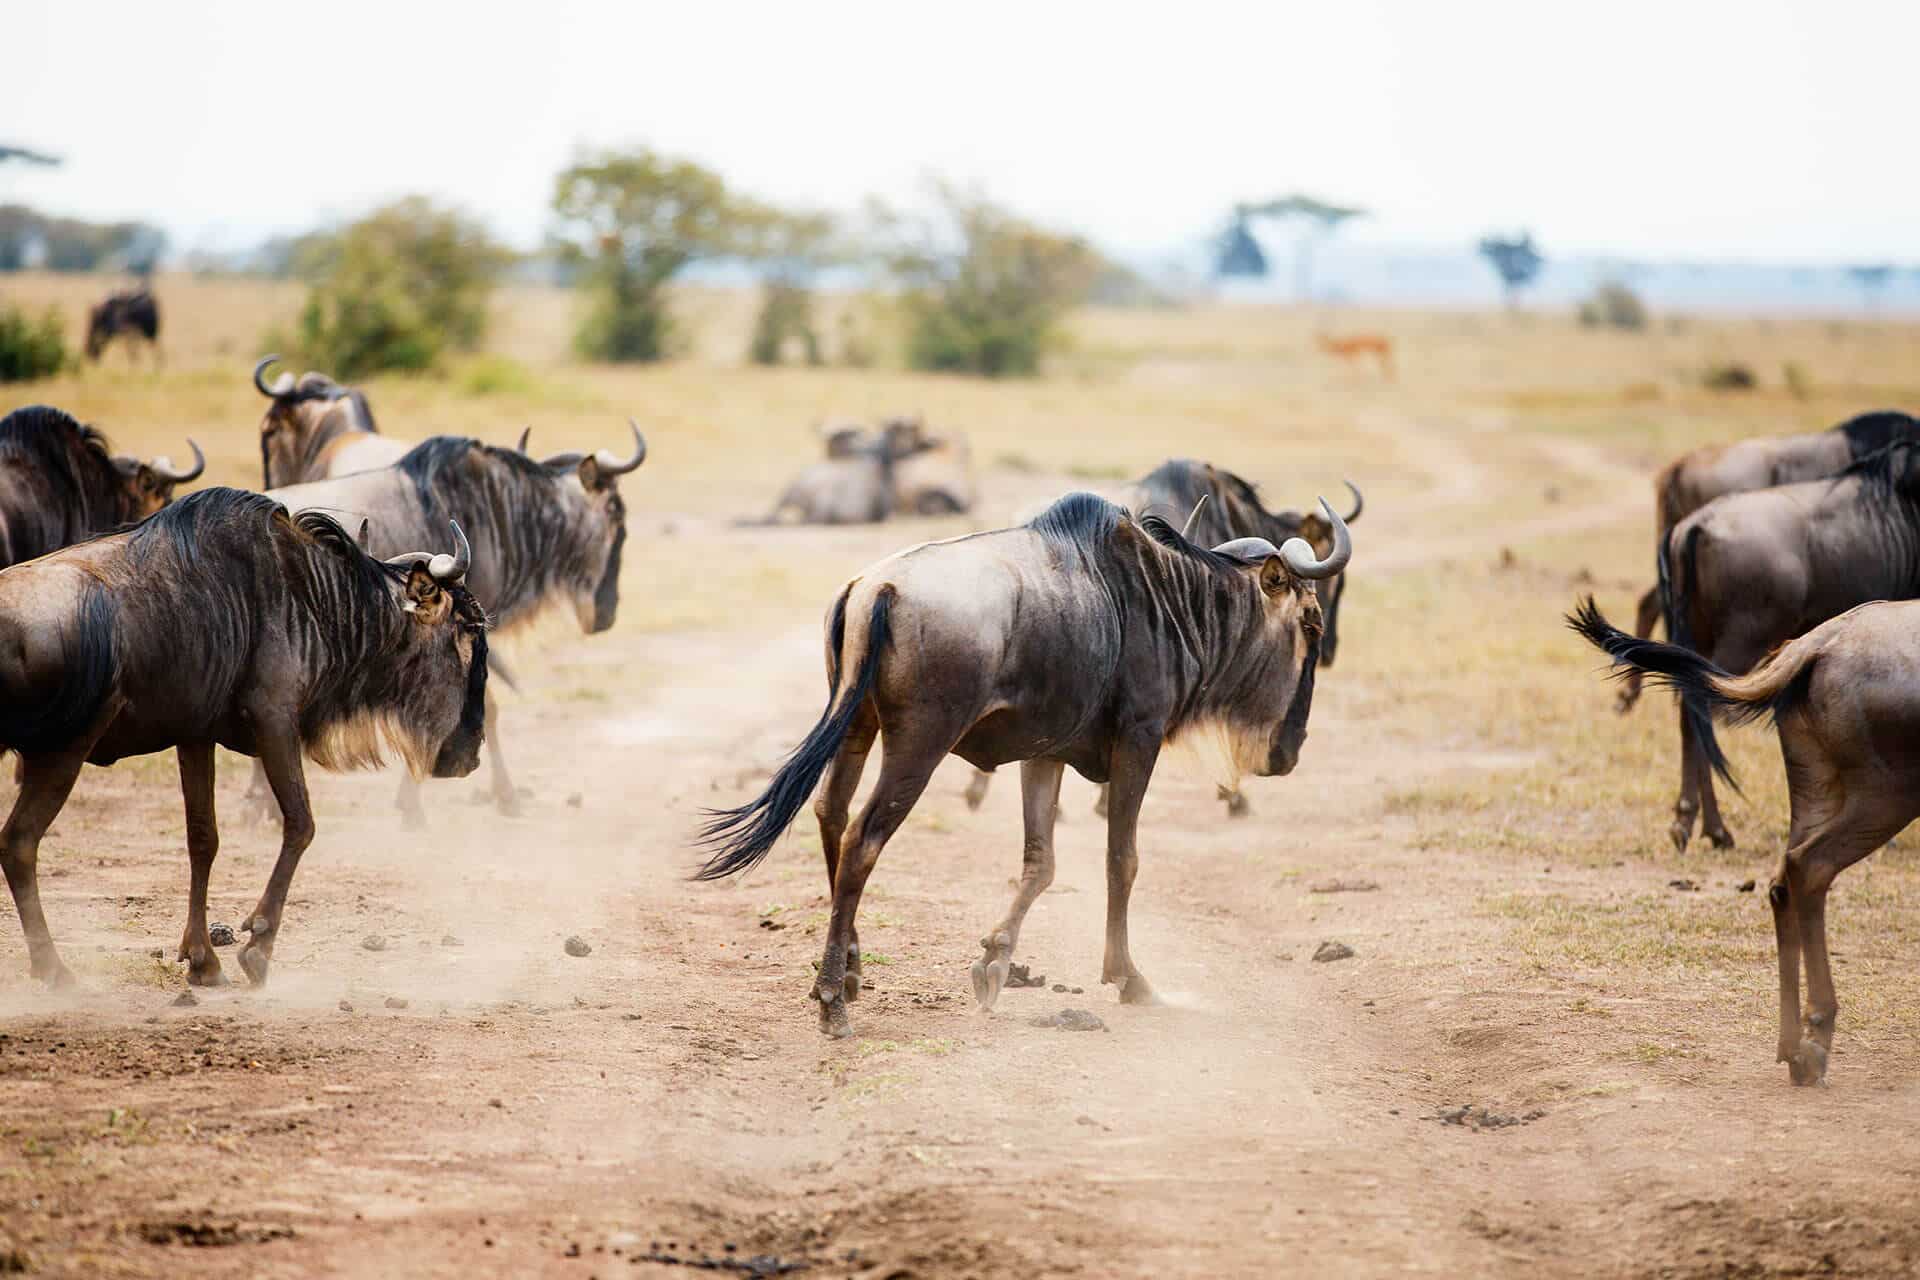 Wildebeest walking in Kenya - - one of the country's in the Africa travel restrictions Coronavirus information